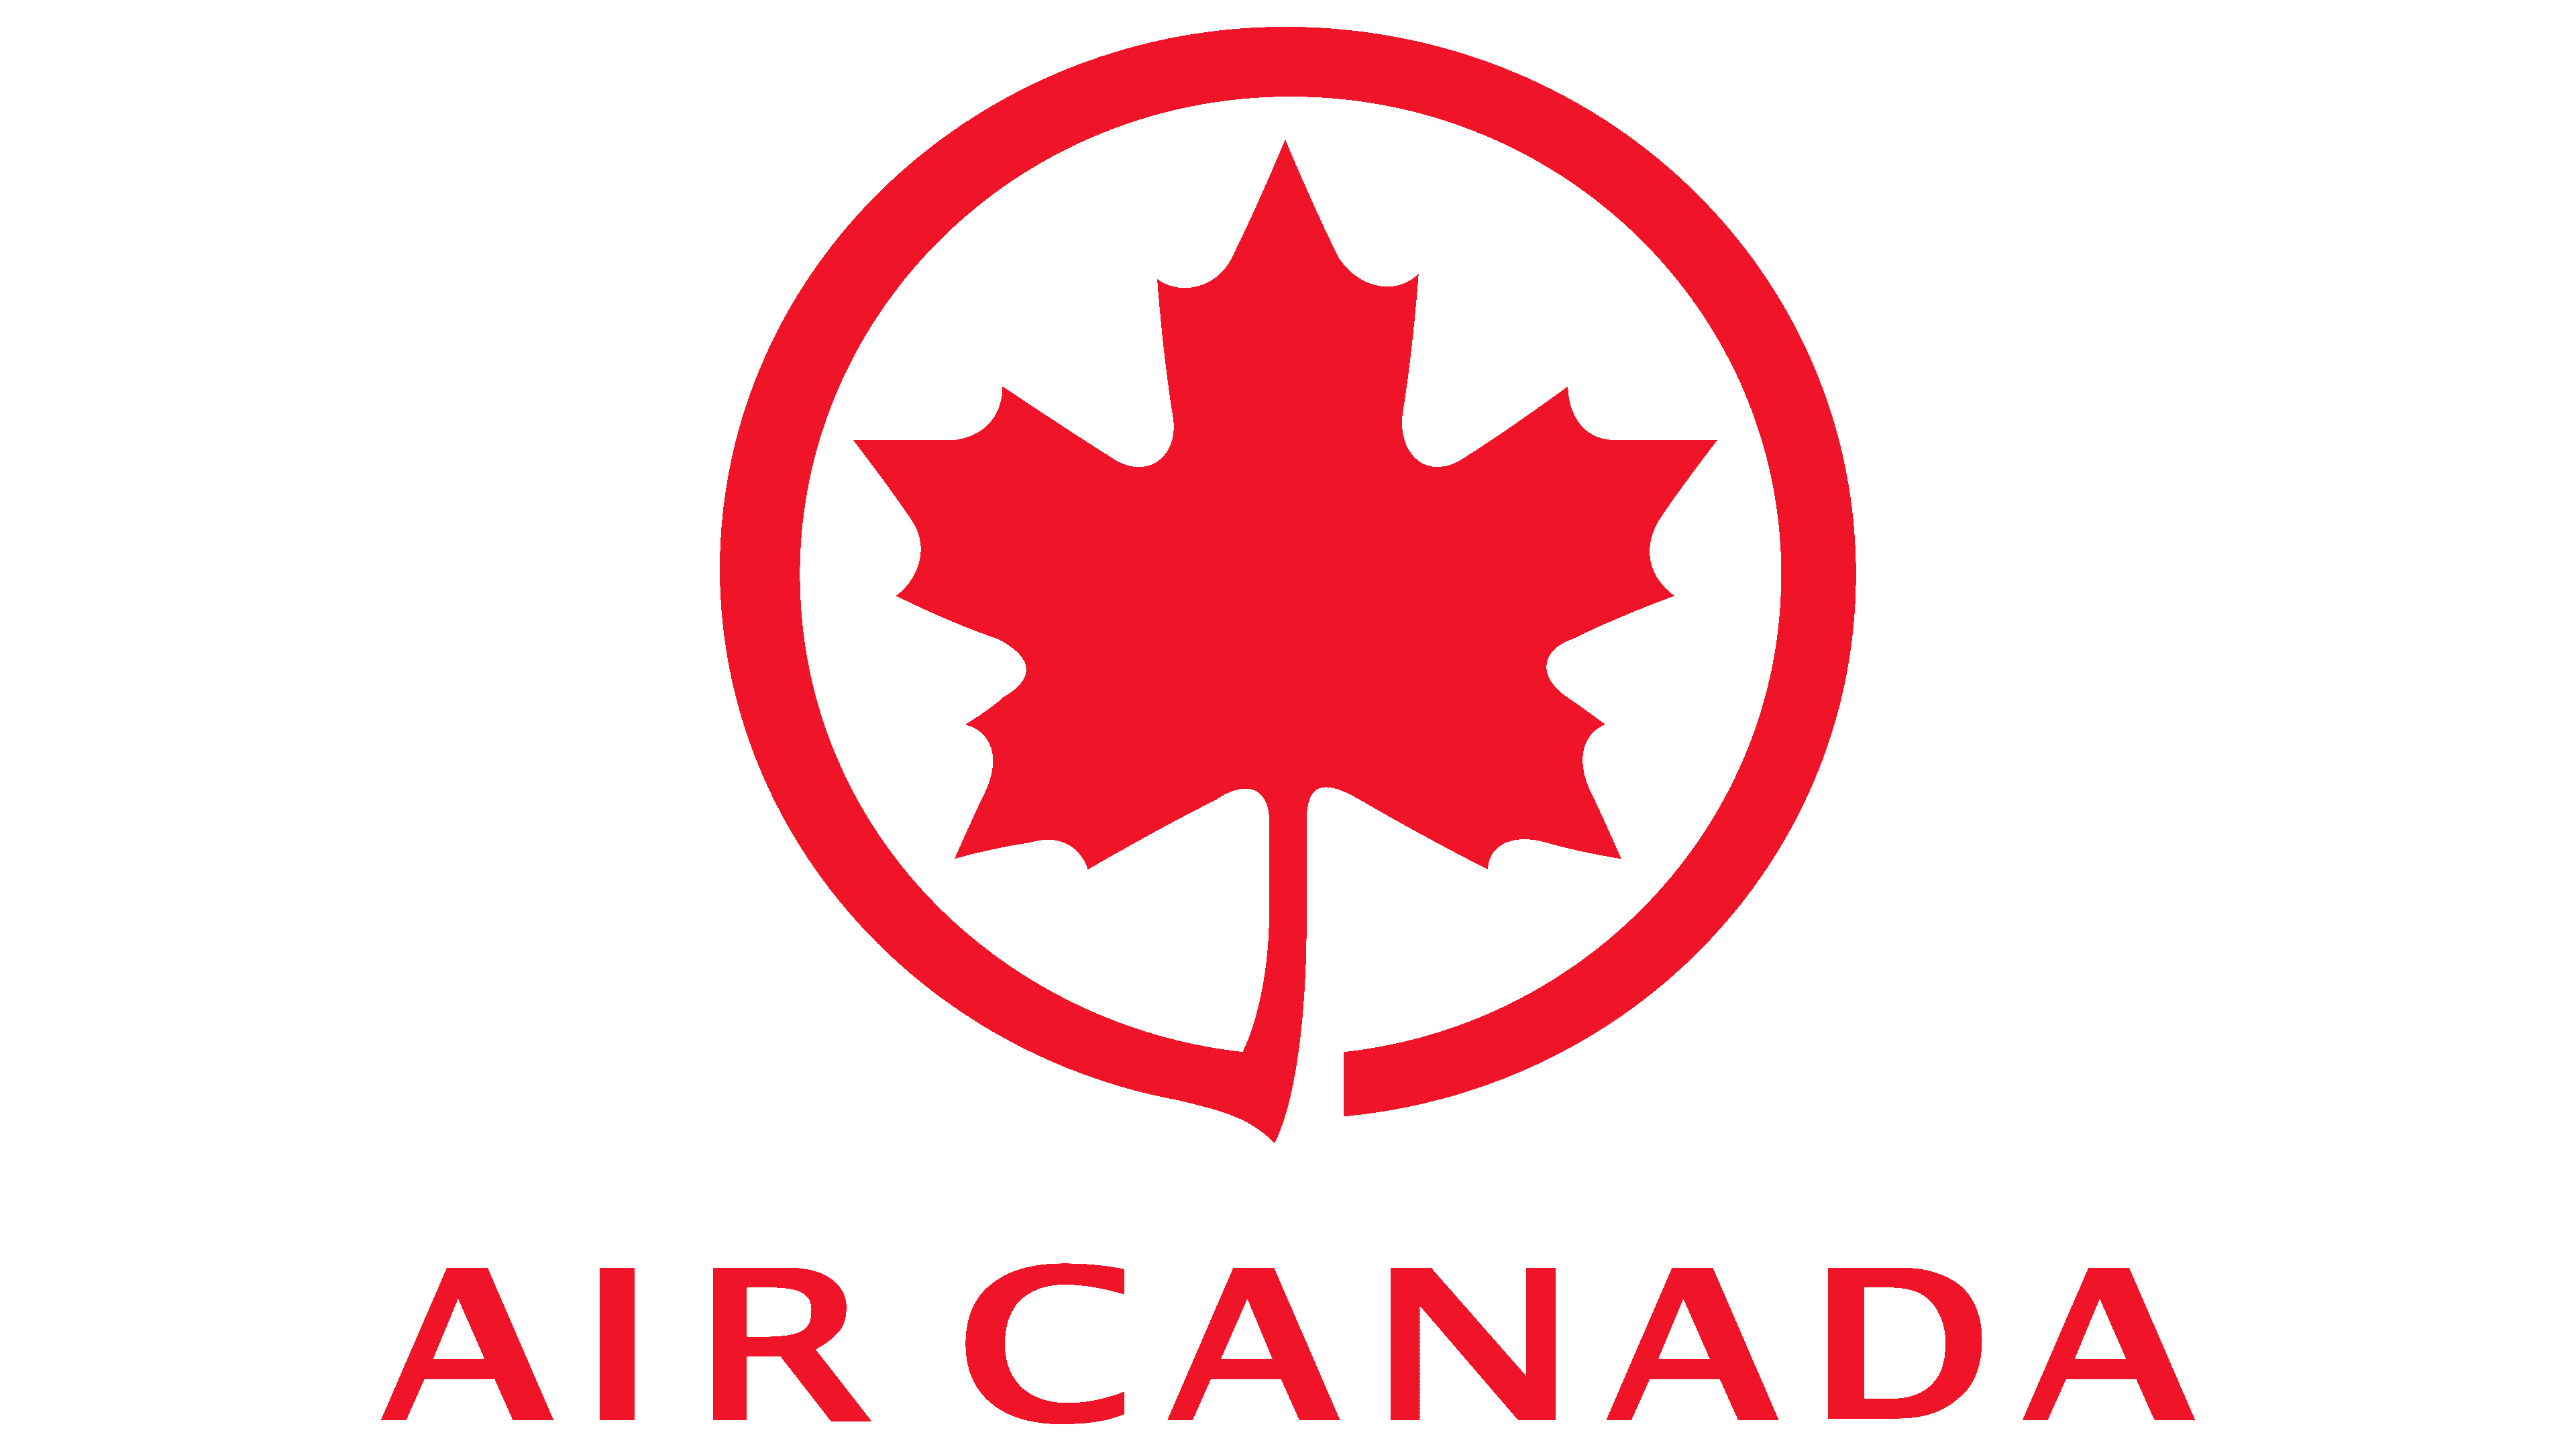 Air Canada, Logo and symbol, Meaning history, Brand, 3840x2160 4K Desktop